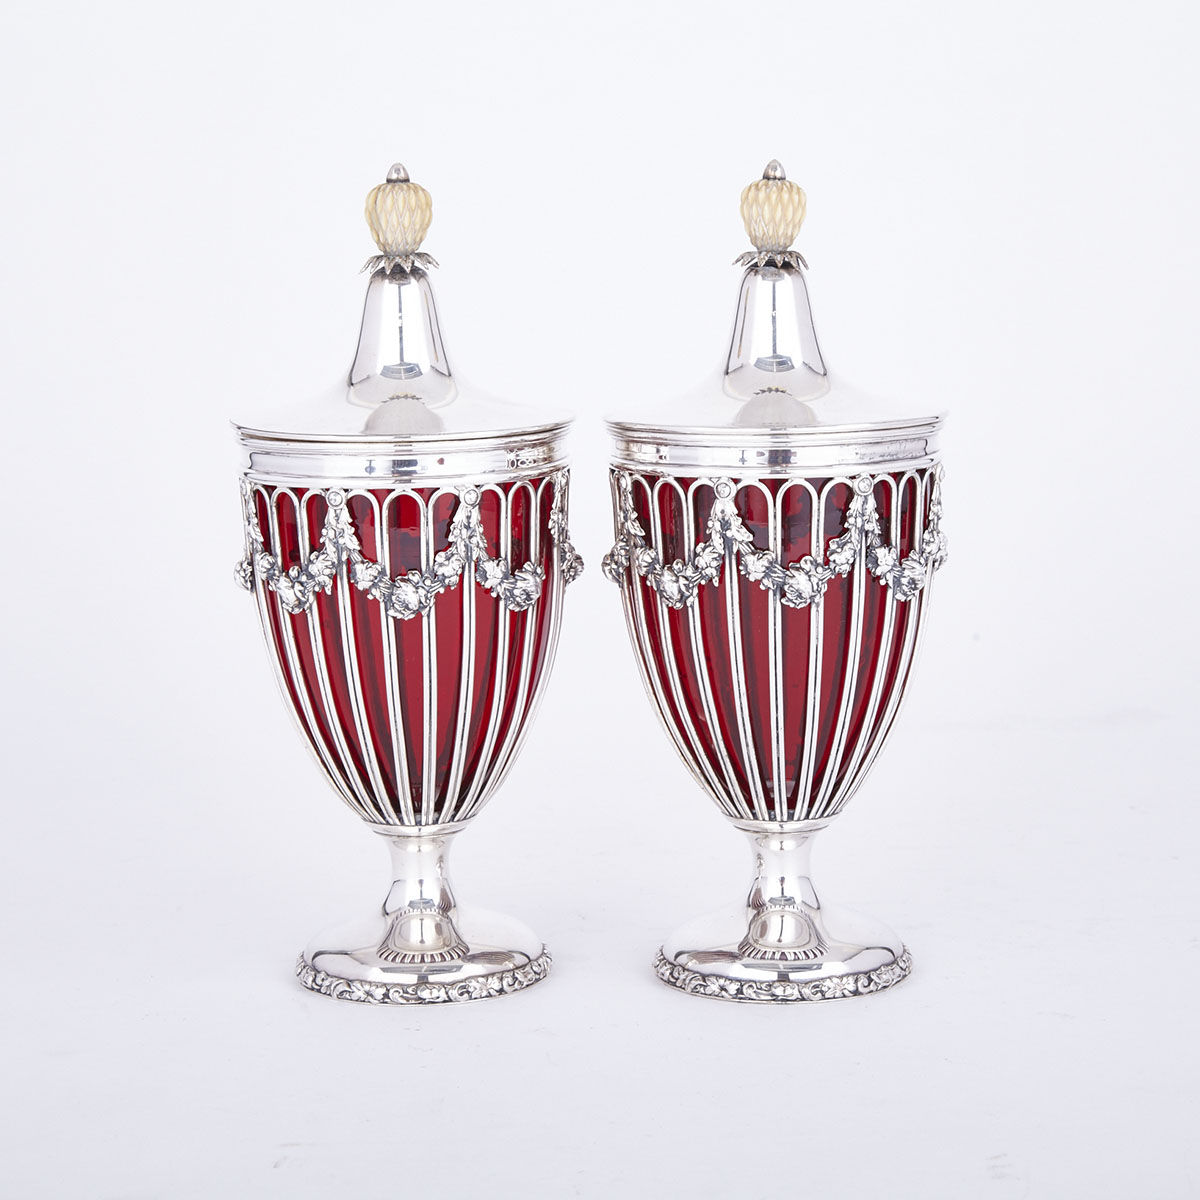 Pair of English Silver Plated Sweetmeat Vases and Covers, Barker-Ellis Co., 20th century